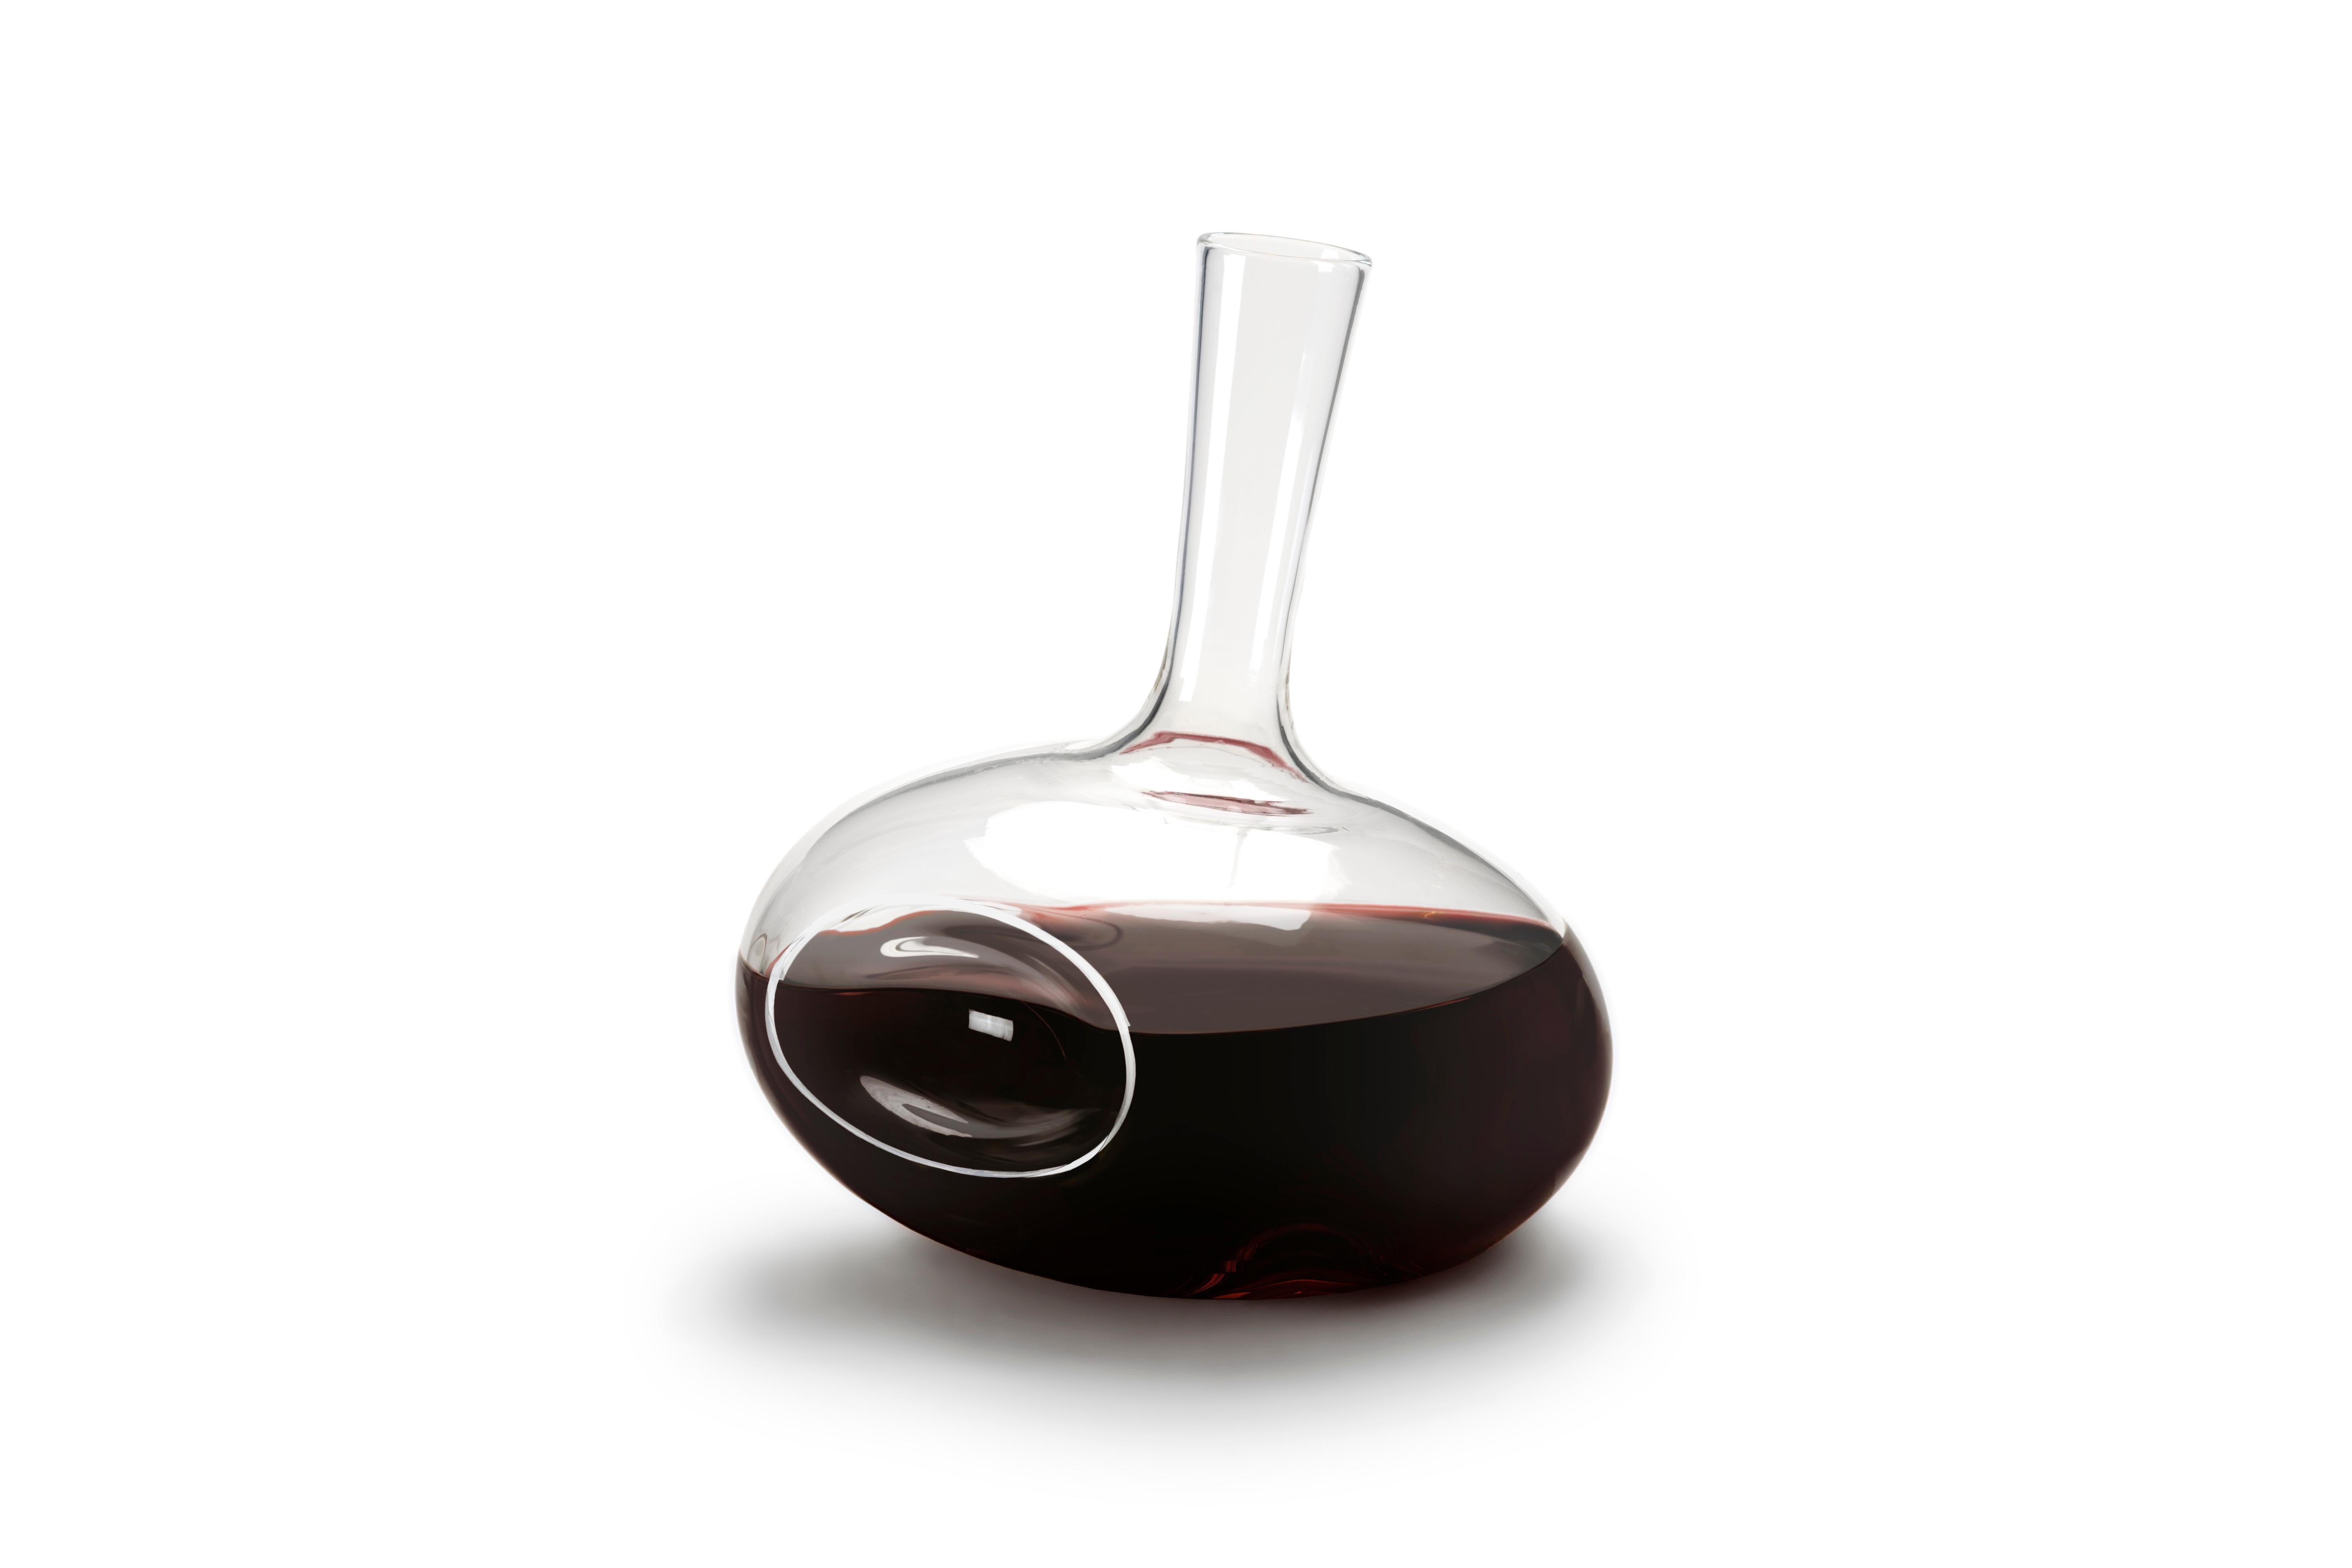 13˚ 60˚ 104˚
Borosilicate.
25 cm in height and 21 cm in diameter.
Winner of a RedDot Design Award.
Open edition.

Mouth-blown and manually produced in Slovenia without the use of moulds. Decanters are made in 20-piece batches, no more frequently